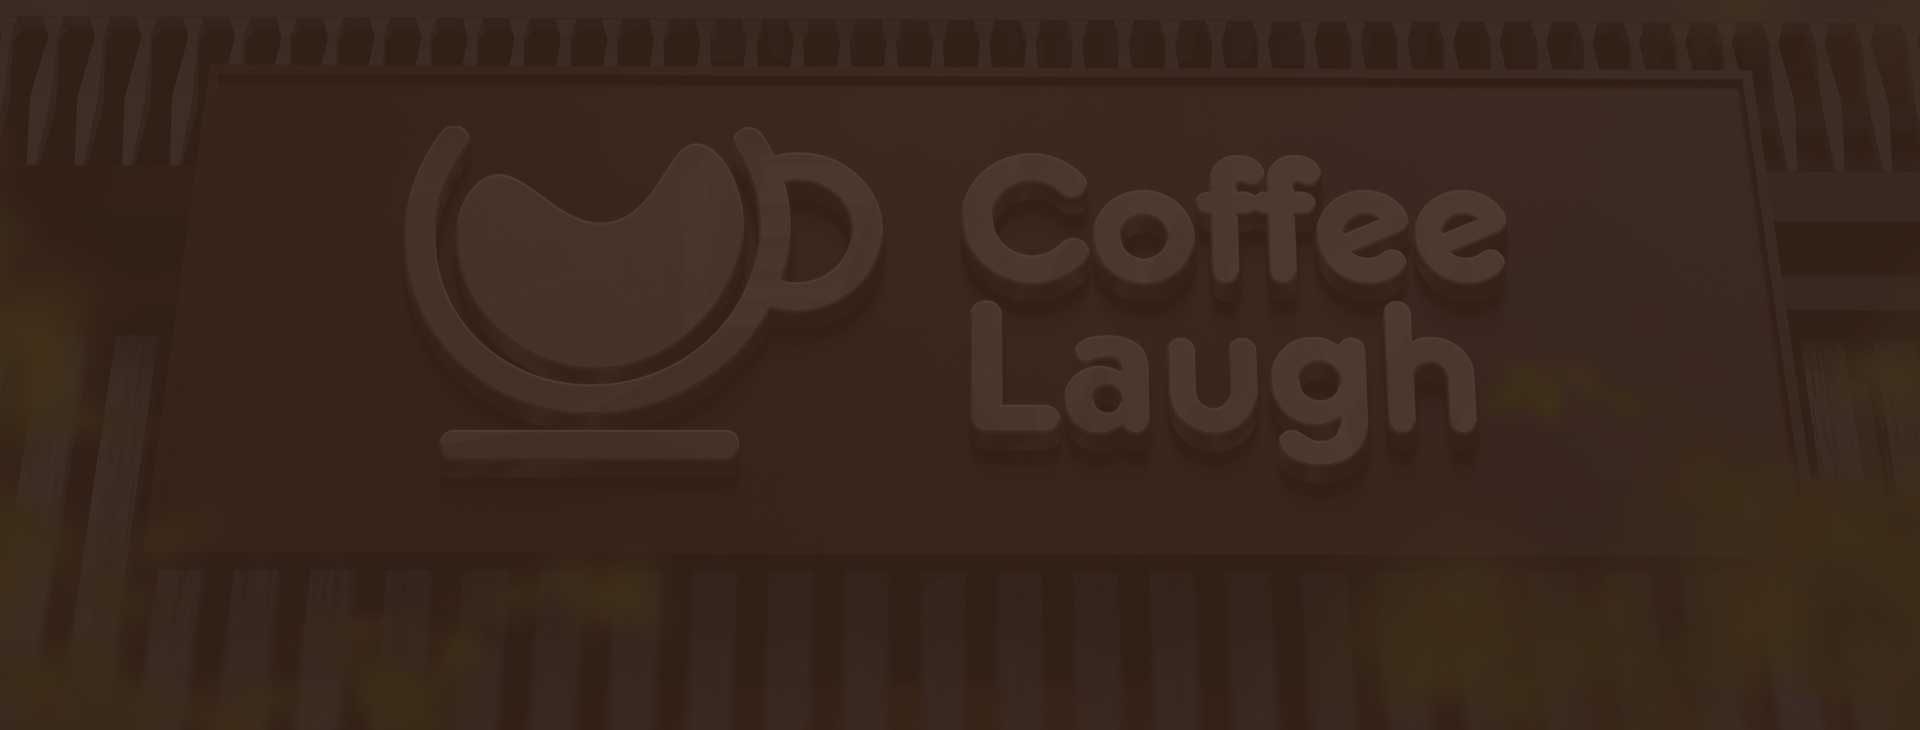 coffee laugh background